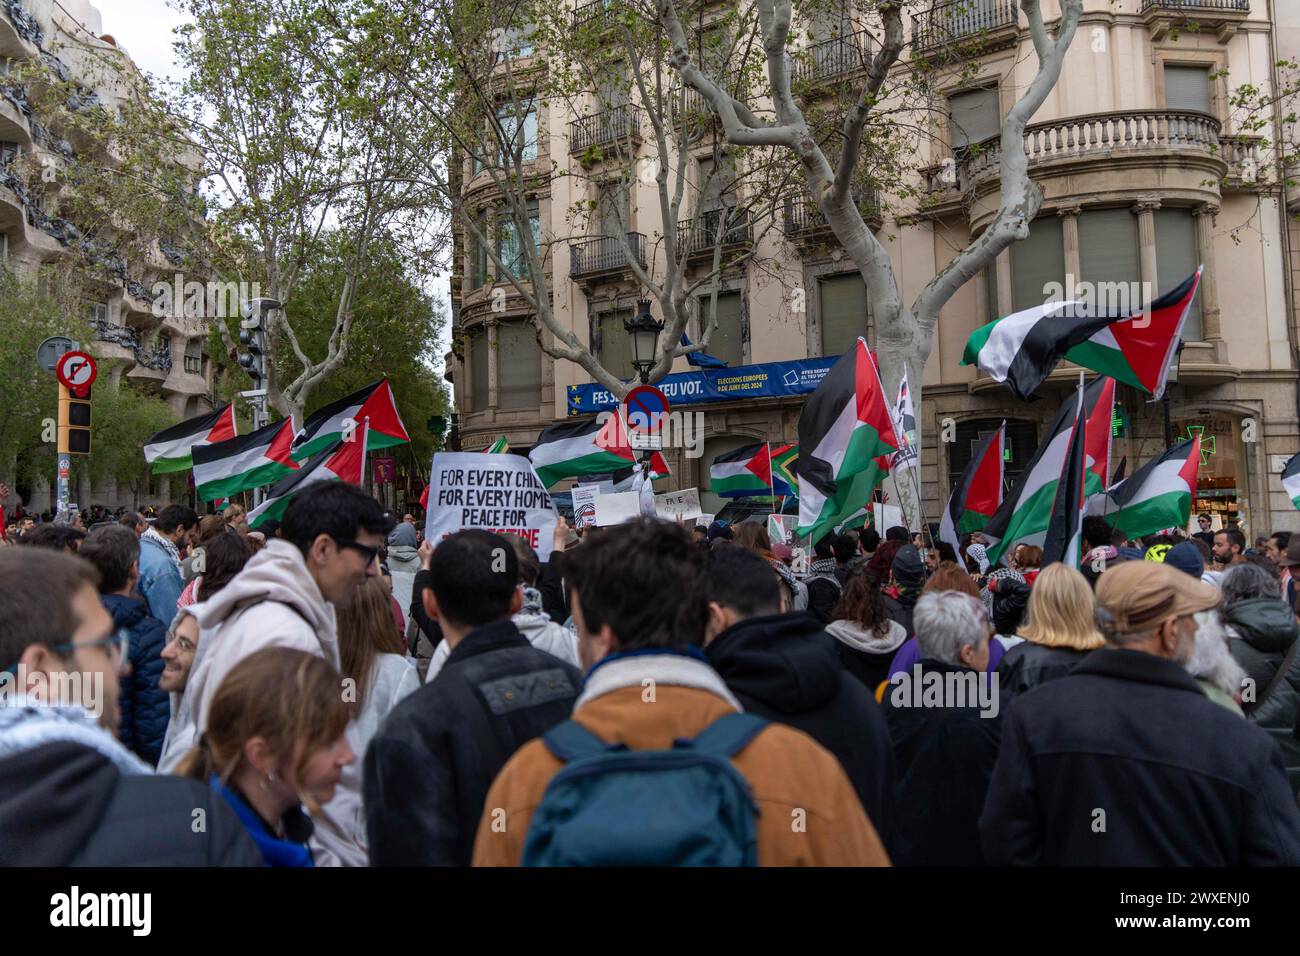 Demonstration of about 300 people in front of the headquarters of the European Union in Barcelona, with 'La Pedrera' as a witness, demanding the Palestinian Land Day, an event commemorating the beginning of land expropriation by the Israeli government in 1977. This year, with the Gaza conflict ongoing, the demonstration has called for an end to the attacks on Gaza. Manifestación de unas 300 personas frente a la sede de la Unión Europea en Barcelona, con 'La Pedrera' como testigo, reivindicando el Día de la Tierra Palestina, un acto que conmemora el inicio de la expropiación de tierras por part Stock Photo